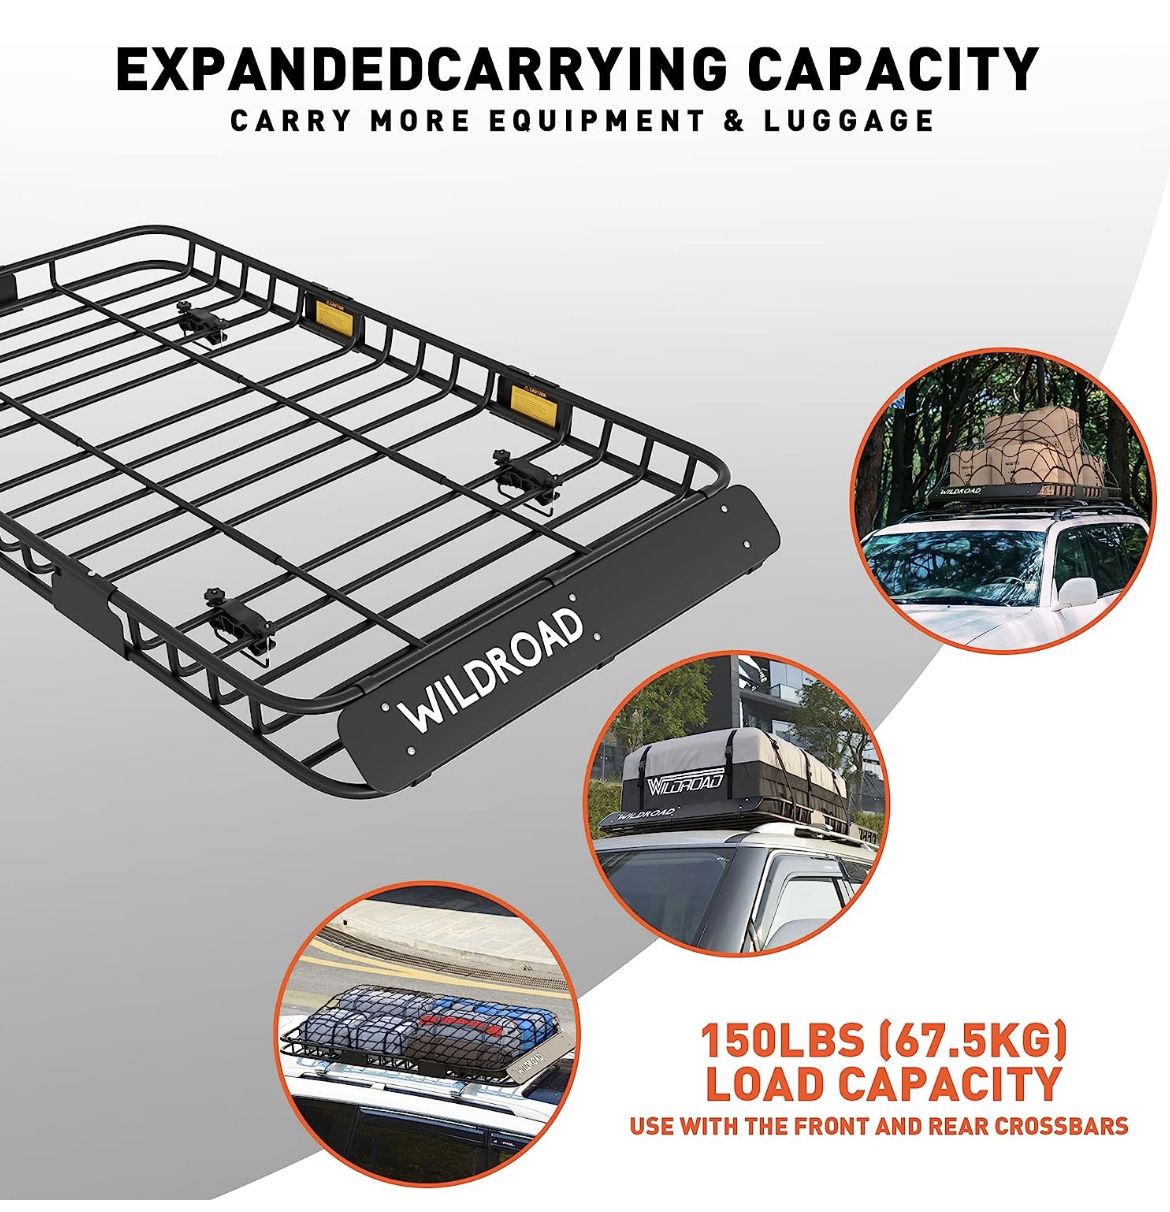 WILDROAD Roof Rack Cargo Basket, Upgraded 4” Fence Car Roof Basket with  Extension, 64x 39x 4 Universal Car Top Luggage Holder Carrier Basket  Fits